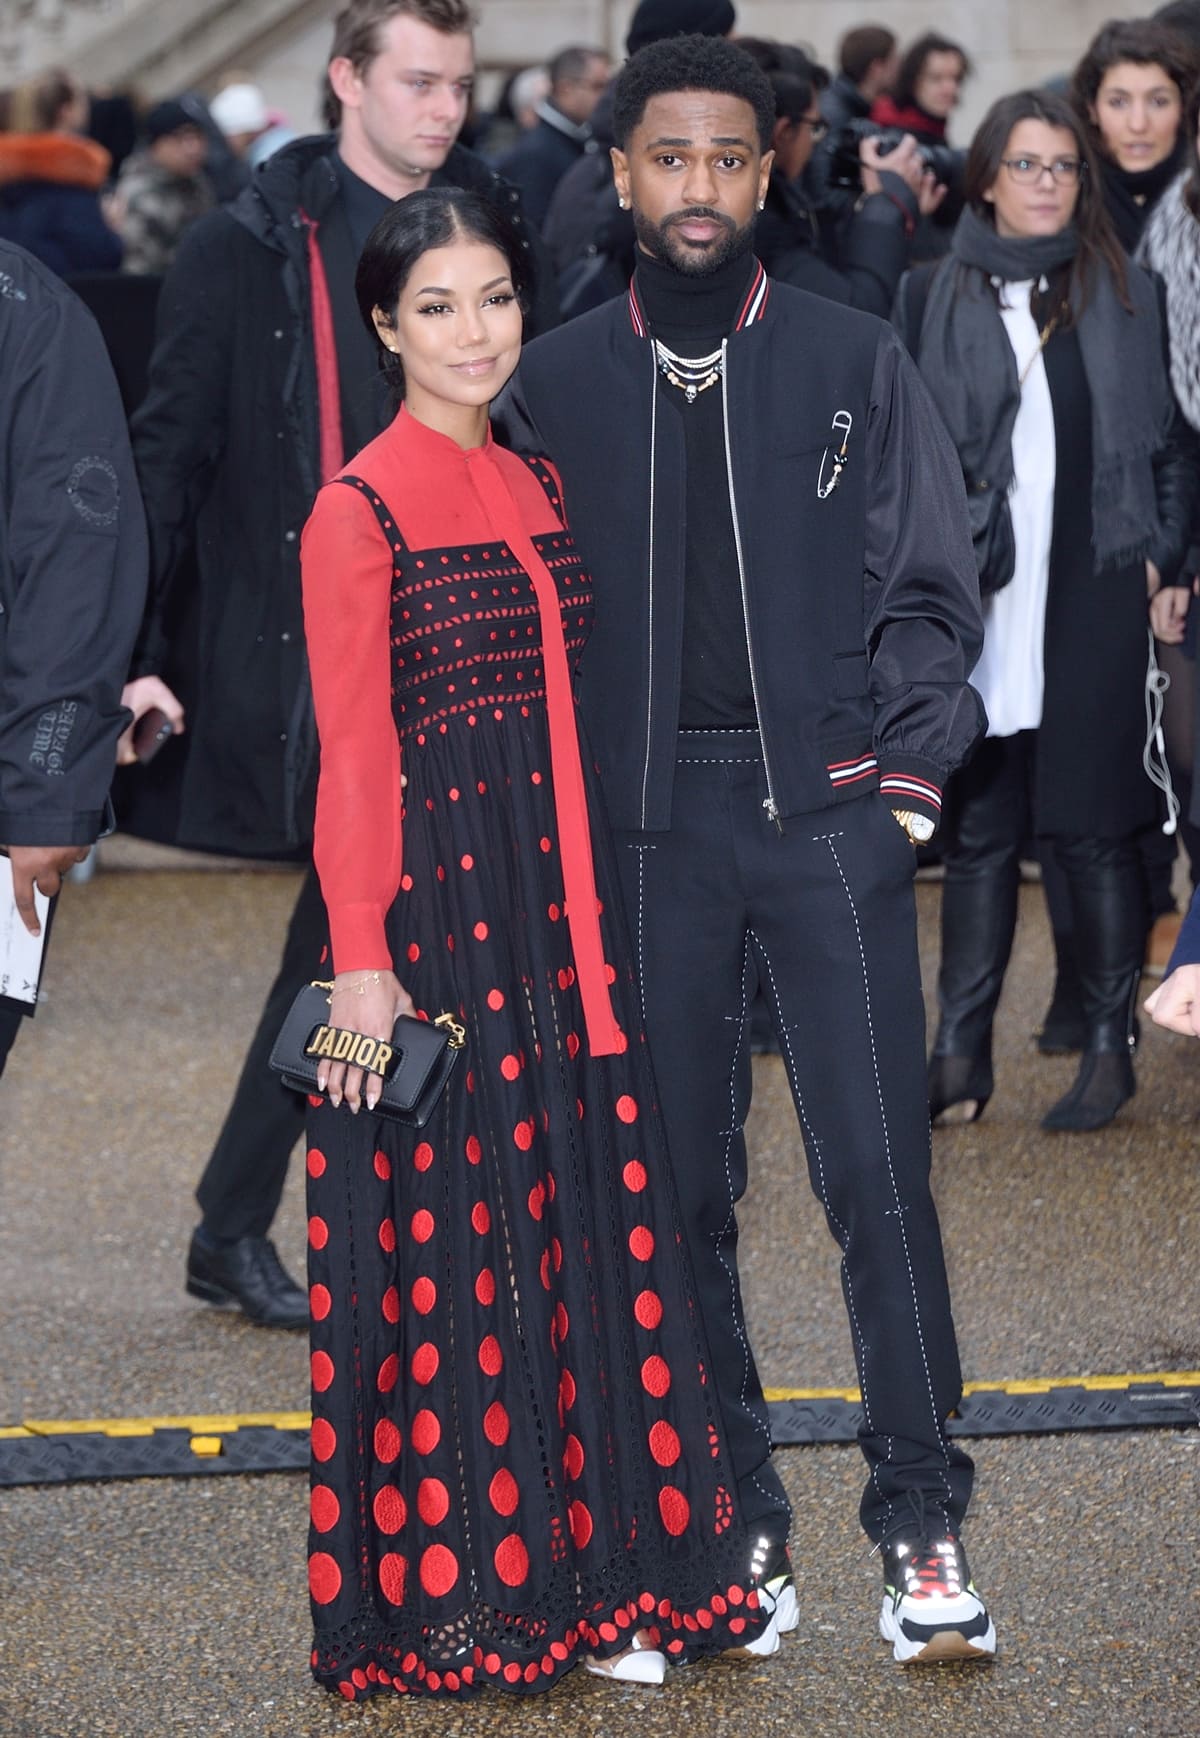 Jhene Aiko and Big Sean attend the Dior Homme Menswear Fall/Winter 2018-2019 show